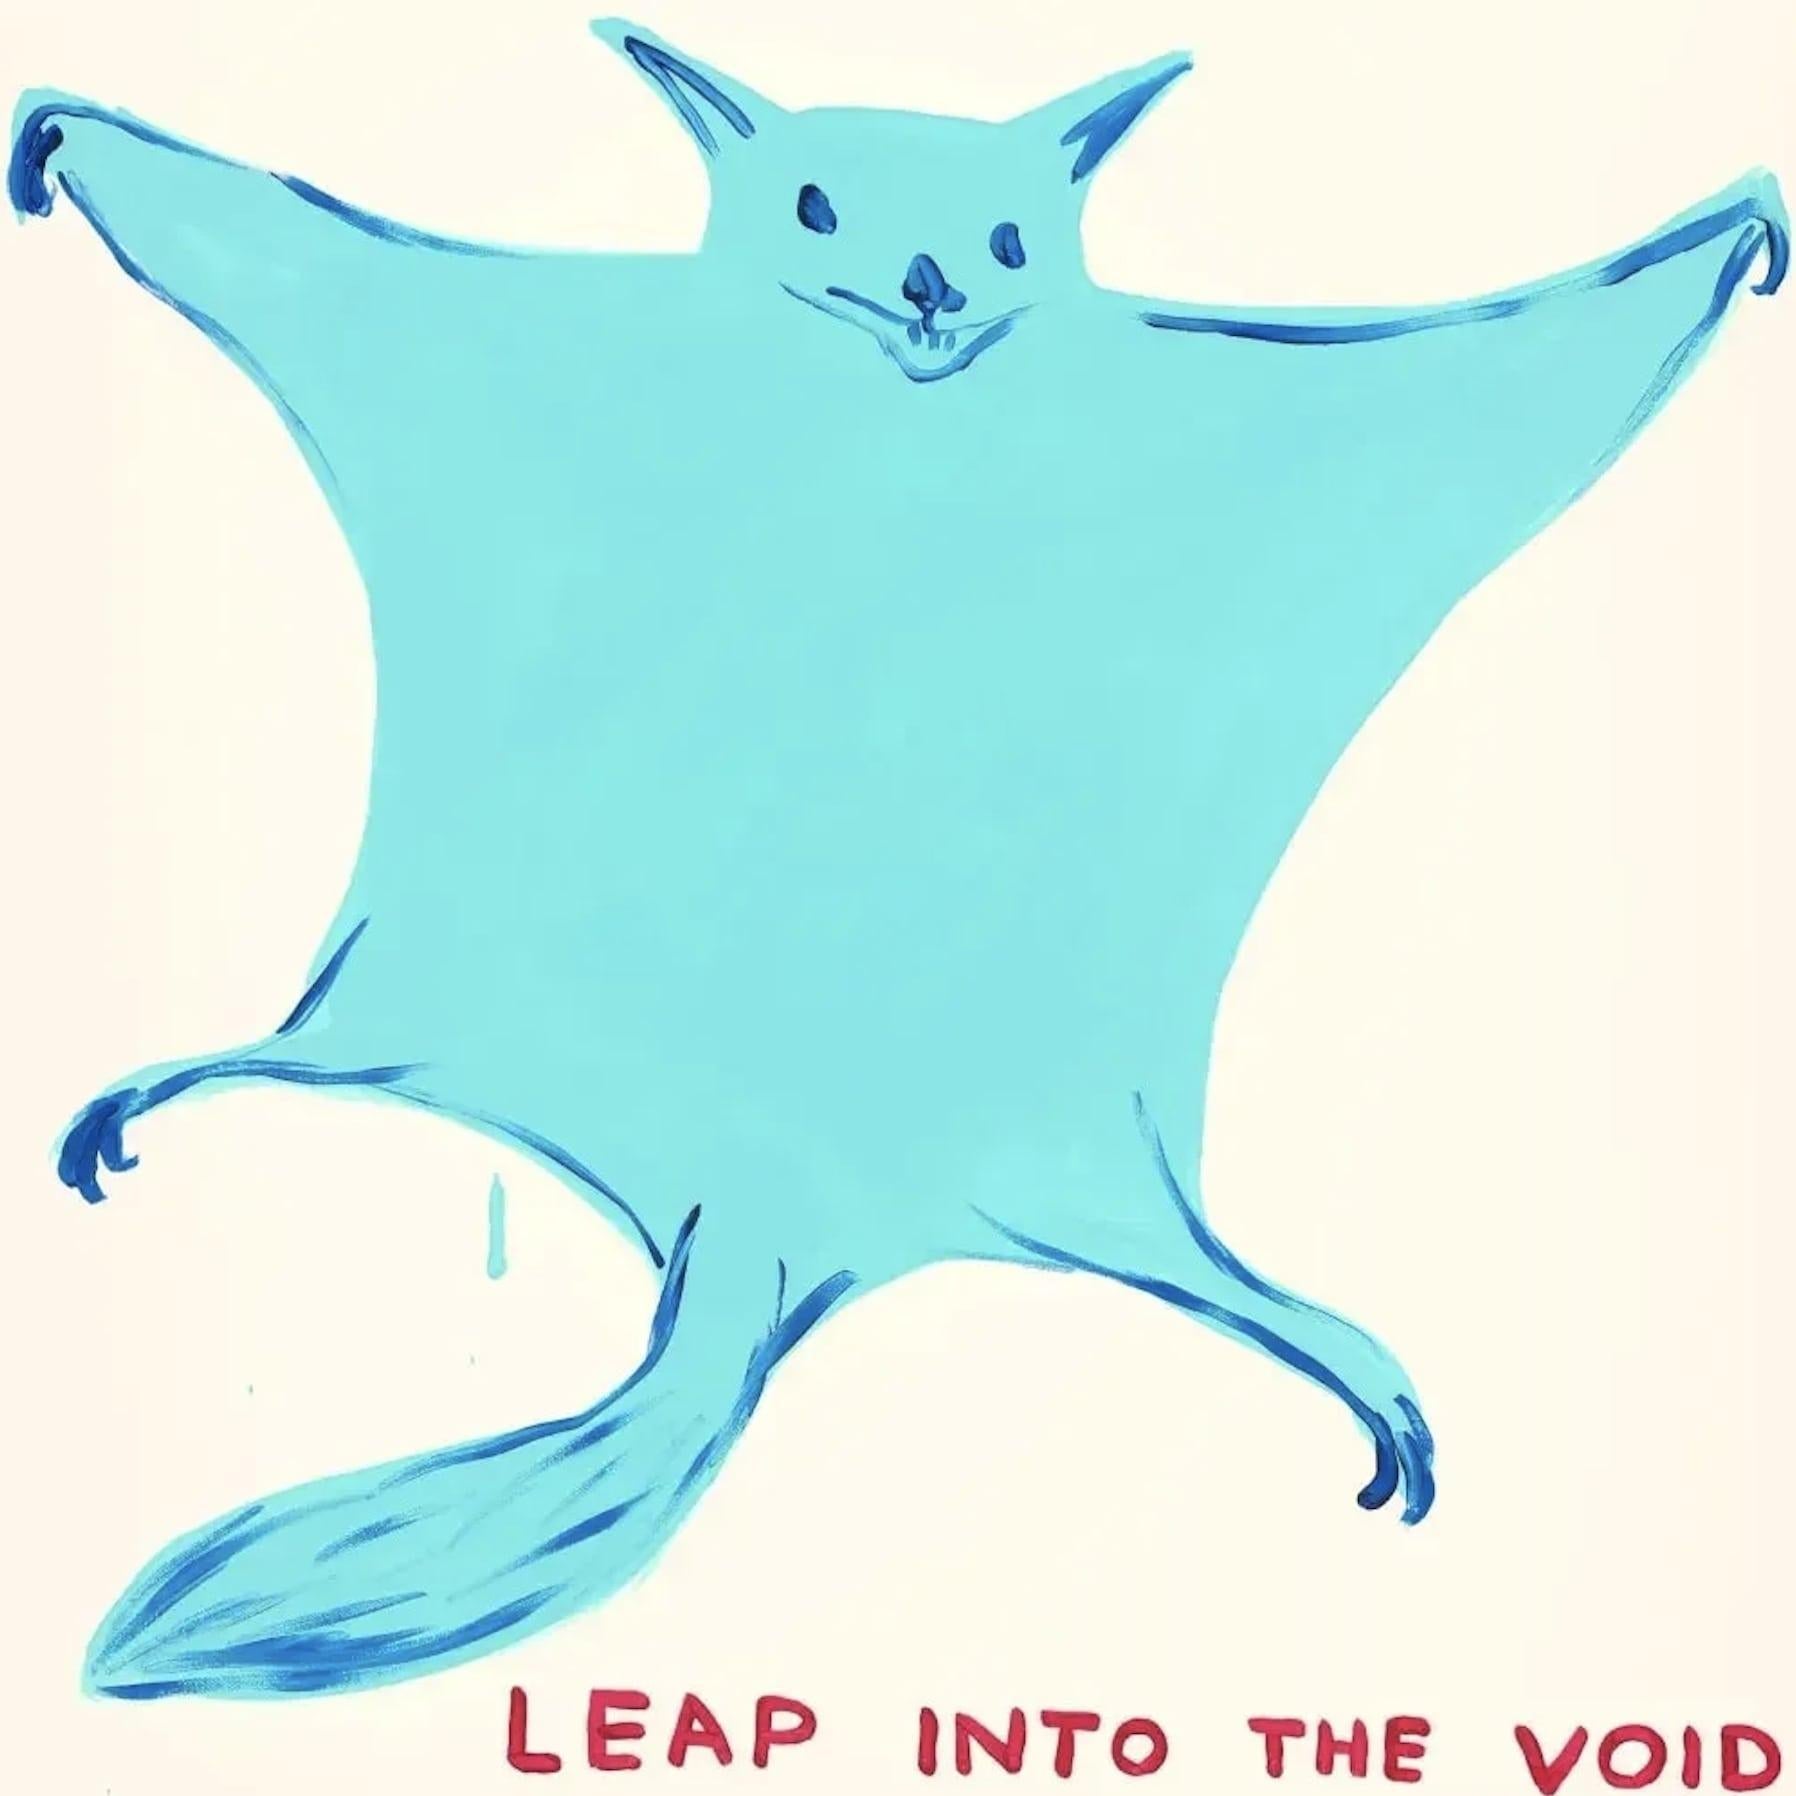 LEAP INTO THE VOID, 2023
12 Colour Screenprint with Varnish Overlay on Somerset Tub Sized 410gsm Paper
21 5/8 x 21 5/8 in
55 x 55 cm
Edition of 125